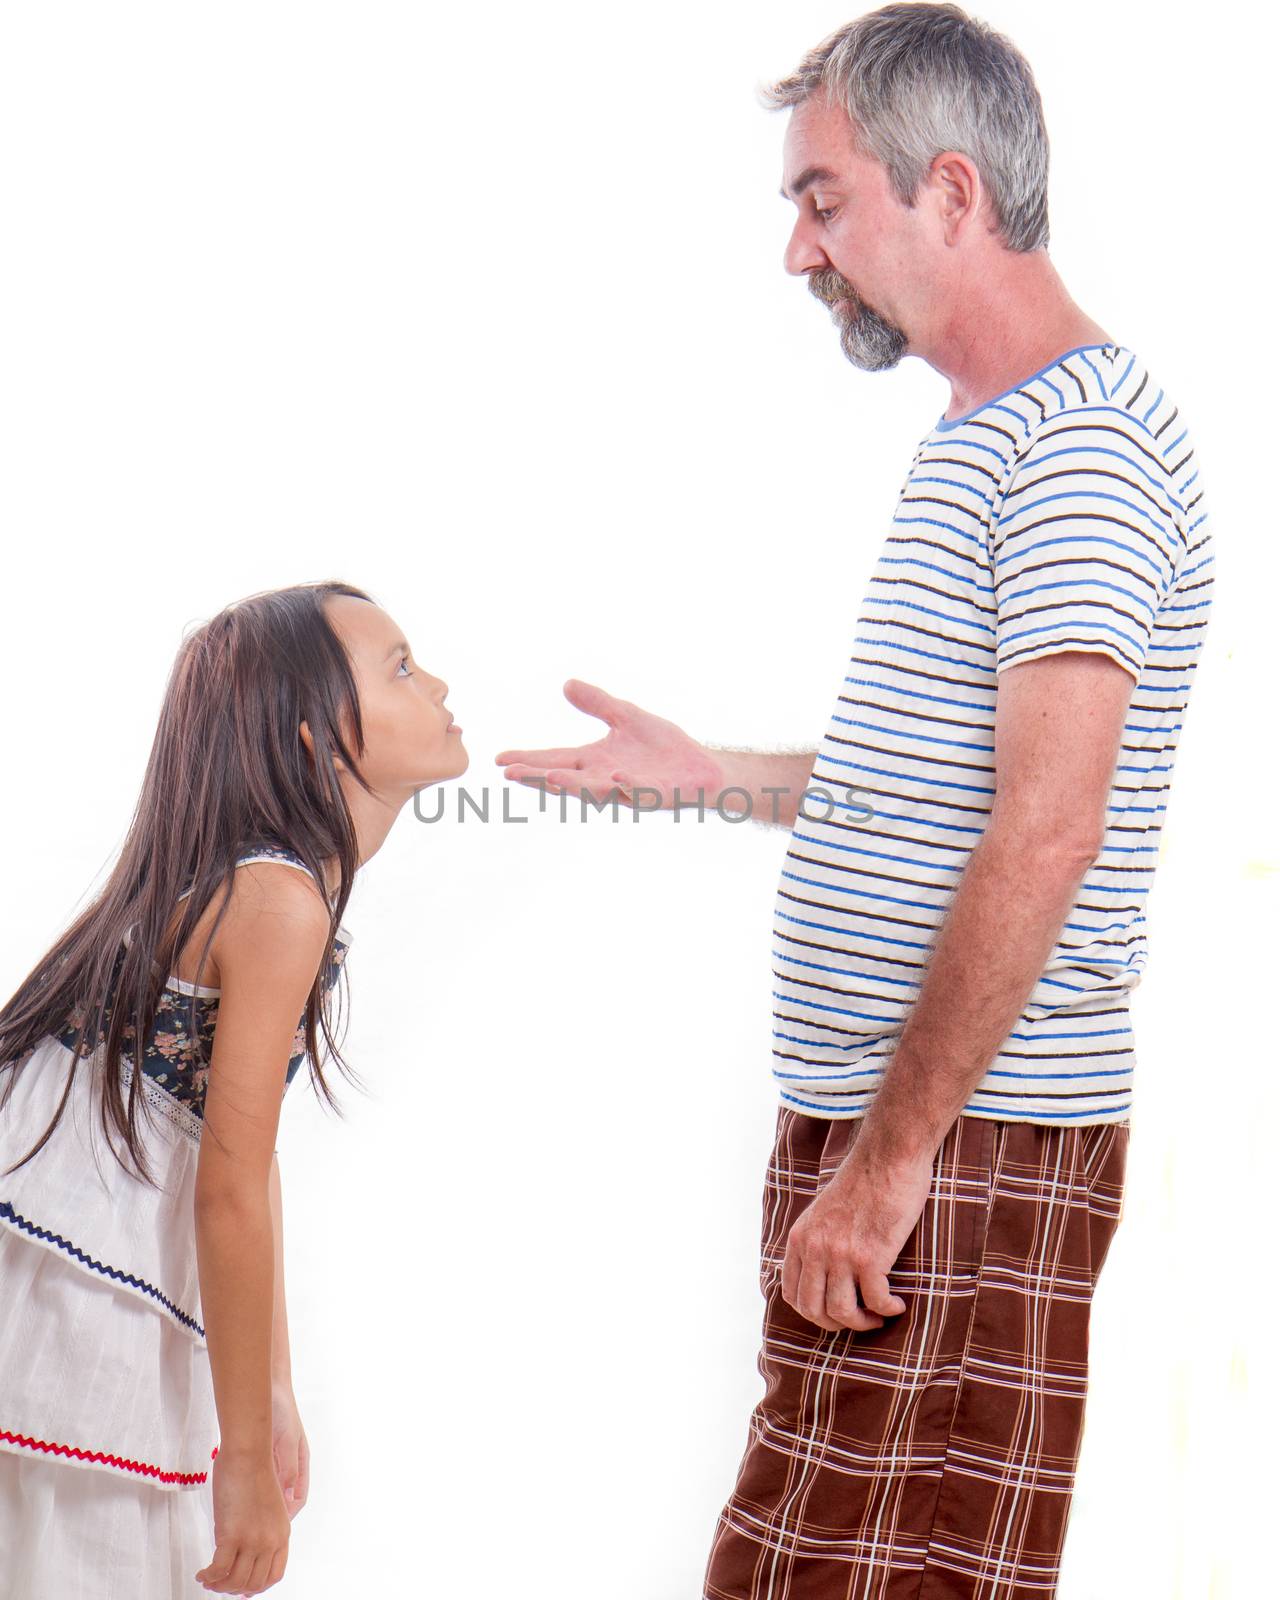 Father scolding naughty daughter. Pointing finger.